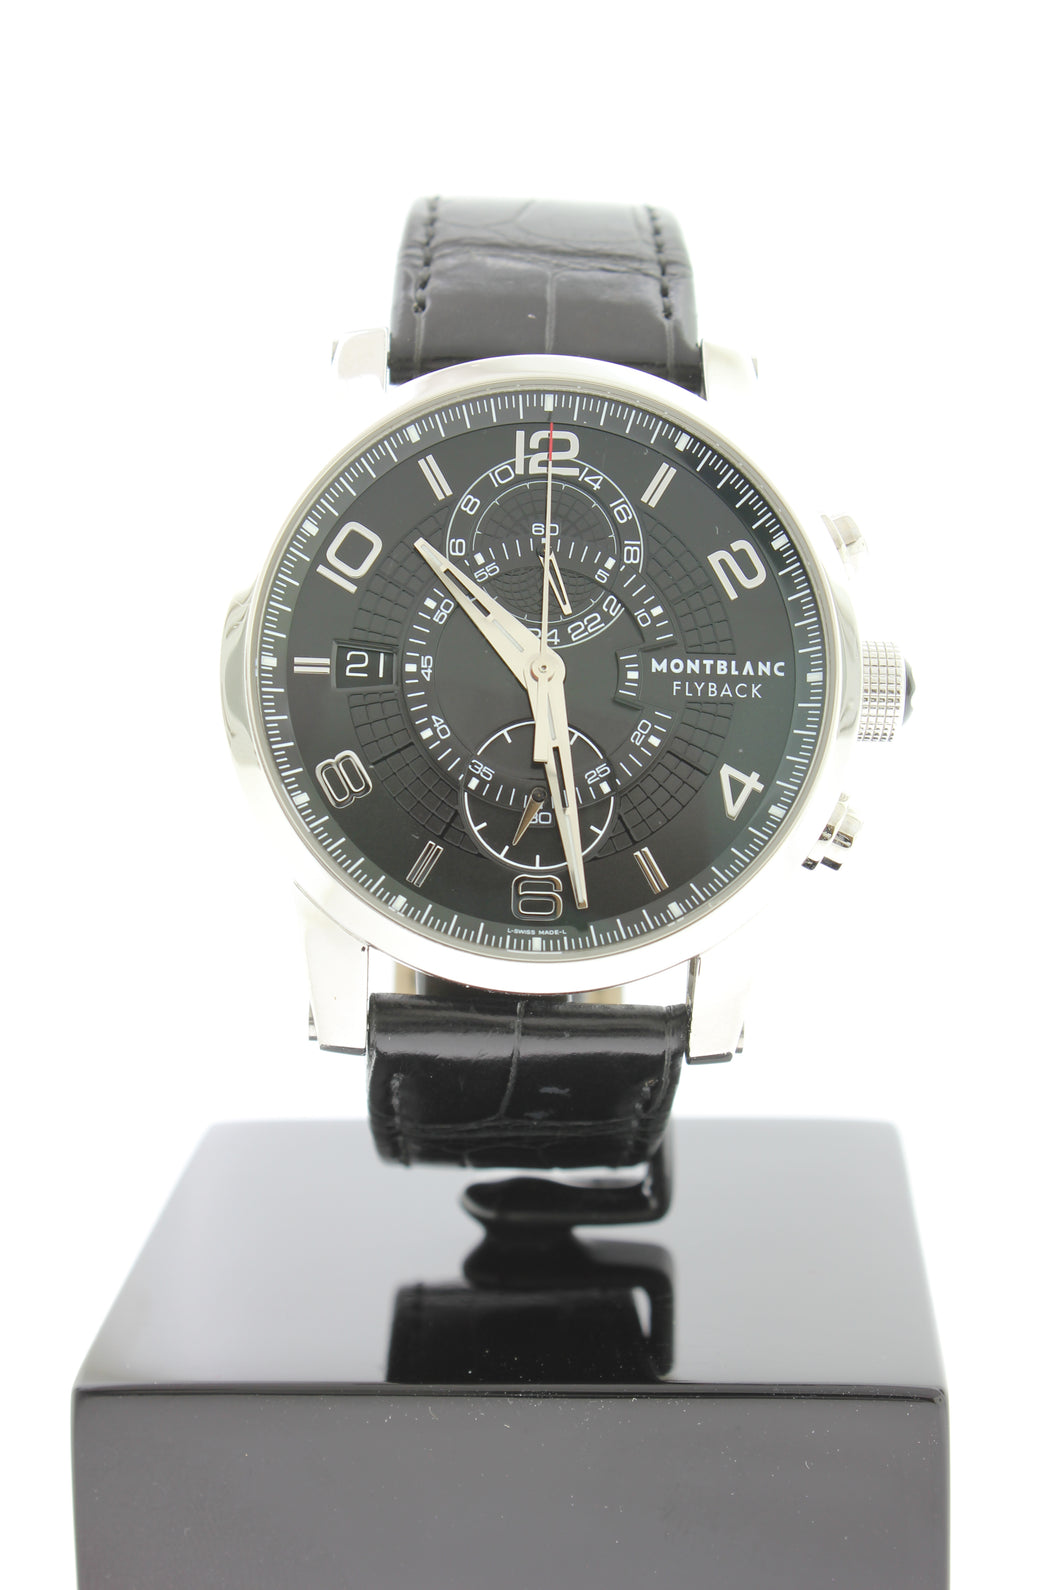 Montblanc Flyback Chronograph 43MM Black Stainless Steel Leather Strap 43mm 7175 - Arnik Jewellers